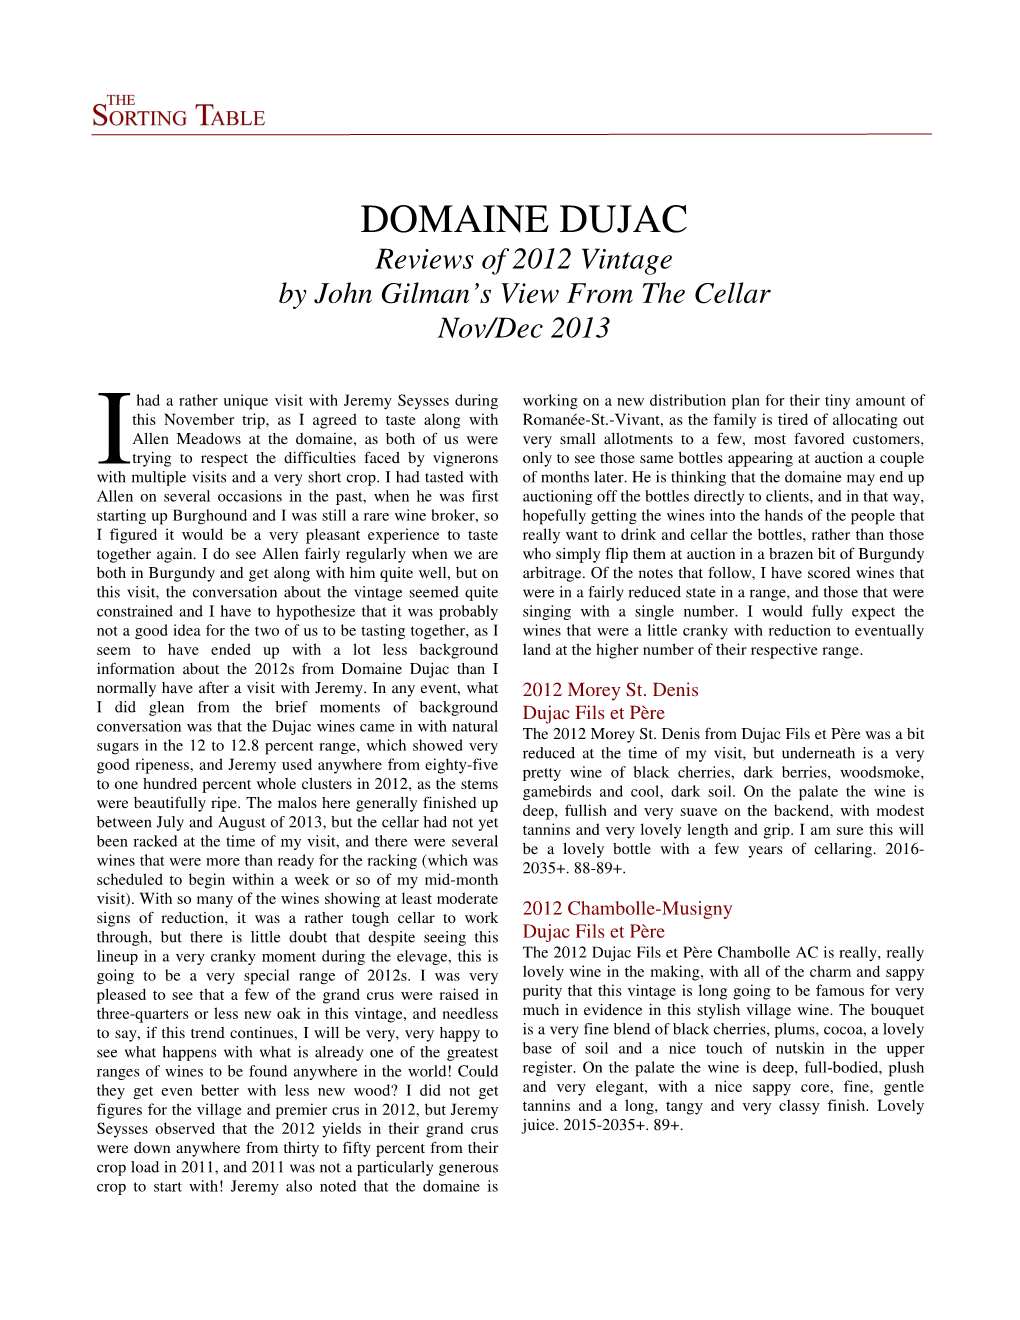 DOMAINE DUJAC Reviews of 2012 Vintage by John Gilman’S View from the Cellar Nov/Dec 2013